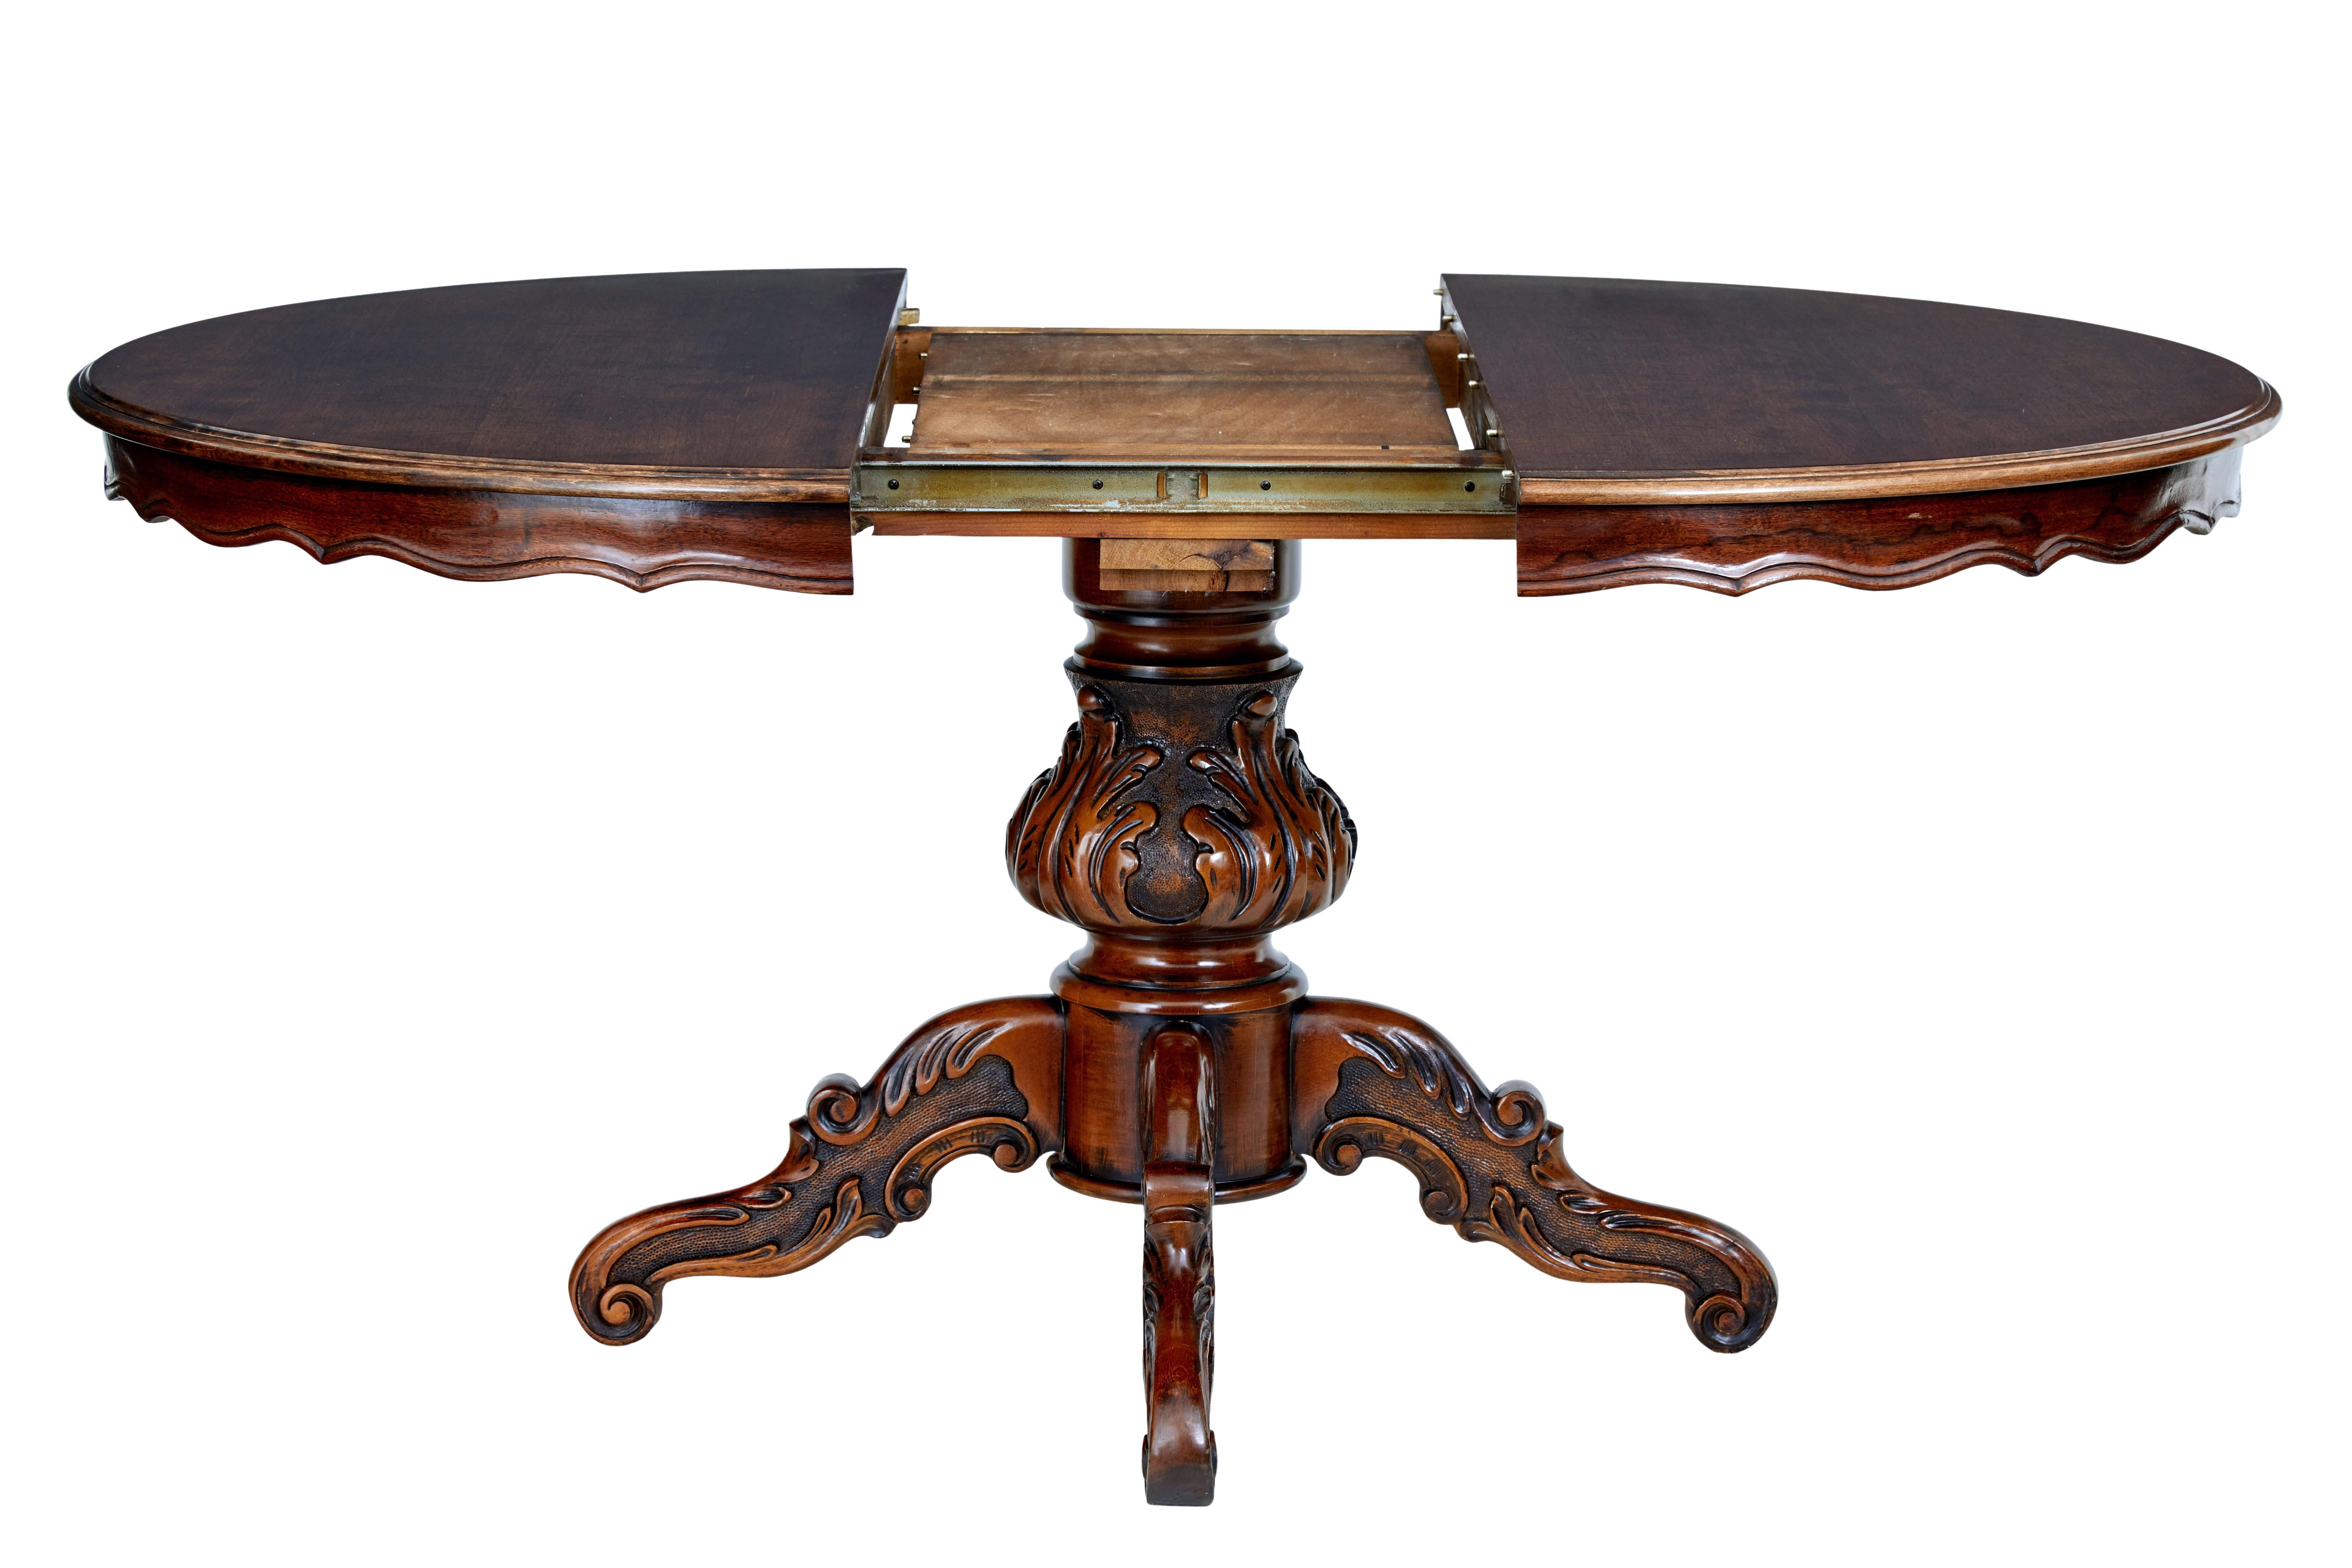 Fine quality Scandinavian mahogany extending dining table, circa 1920.

Good quality piece of design which allows this table to function as a center table and a dining table.

Forming a circular shape of 47 1/4